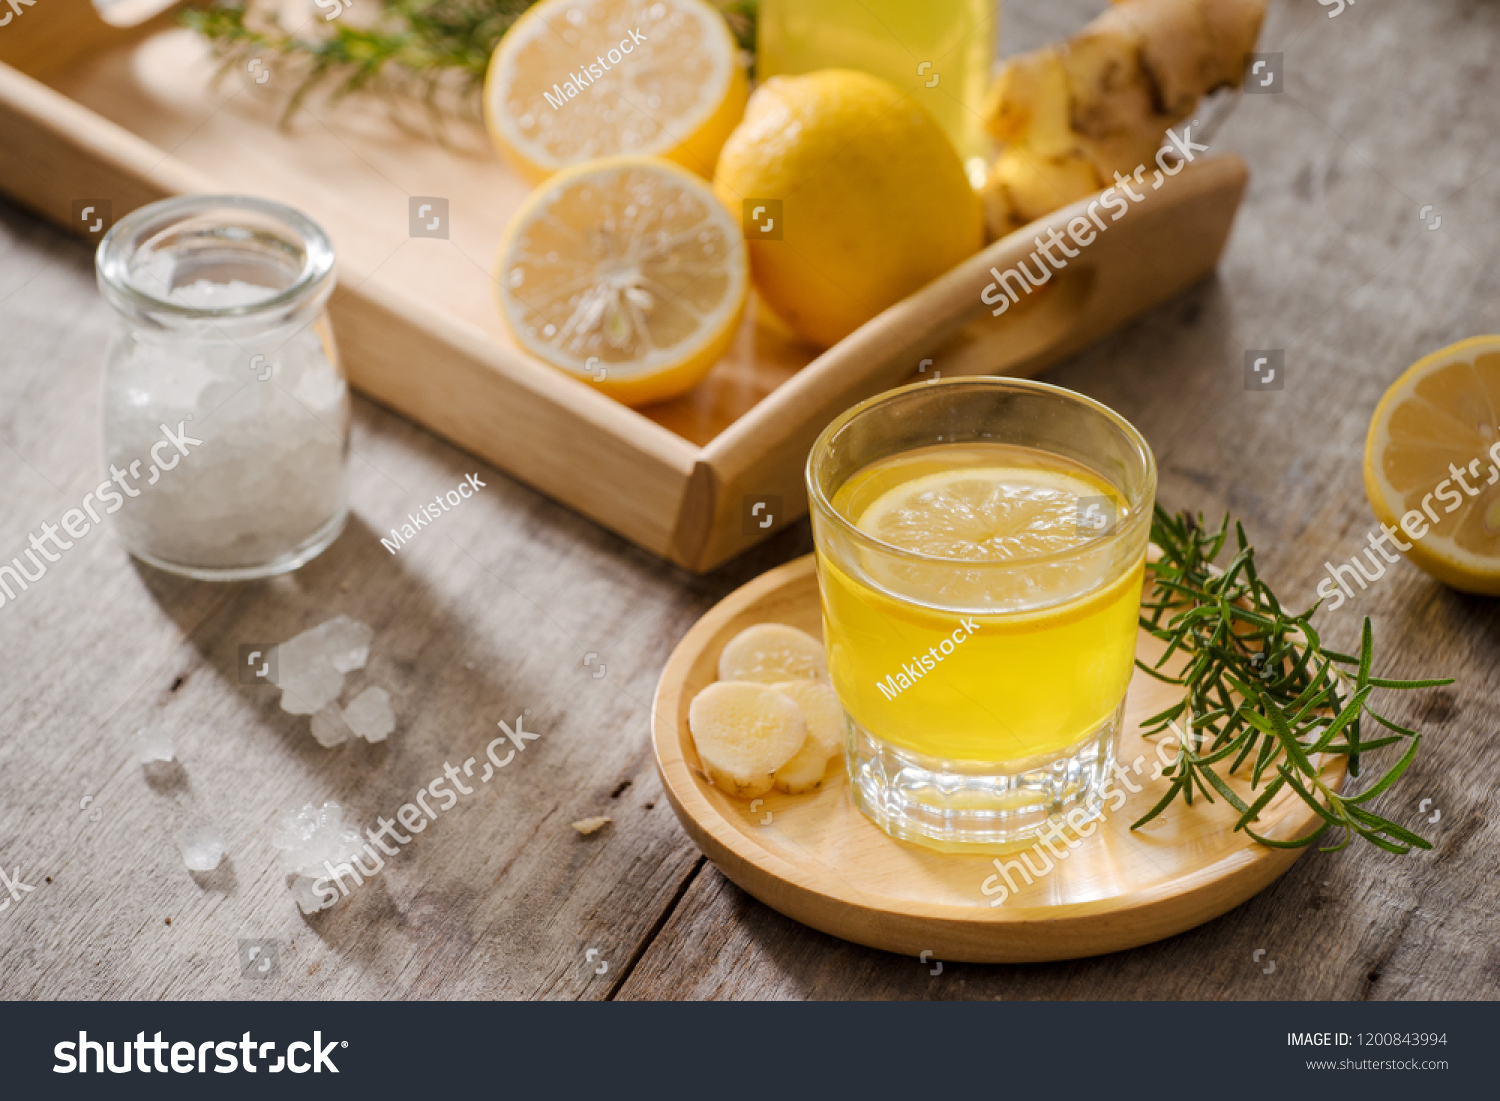 Ginger Ale - Homemade lemon and ginger organic soda drink, copy space. #1200843994